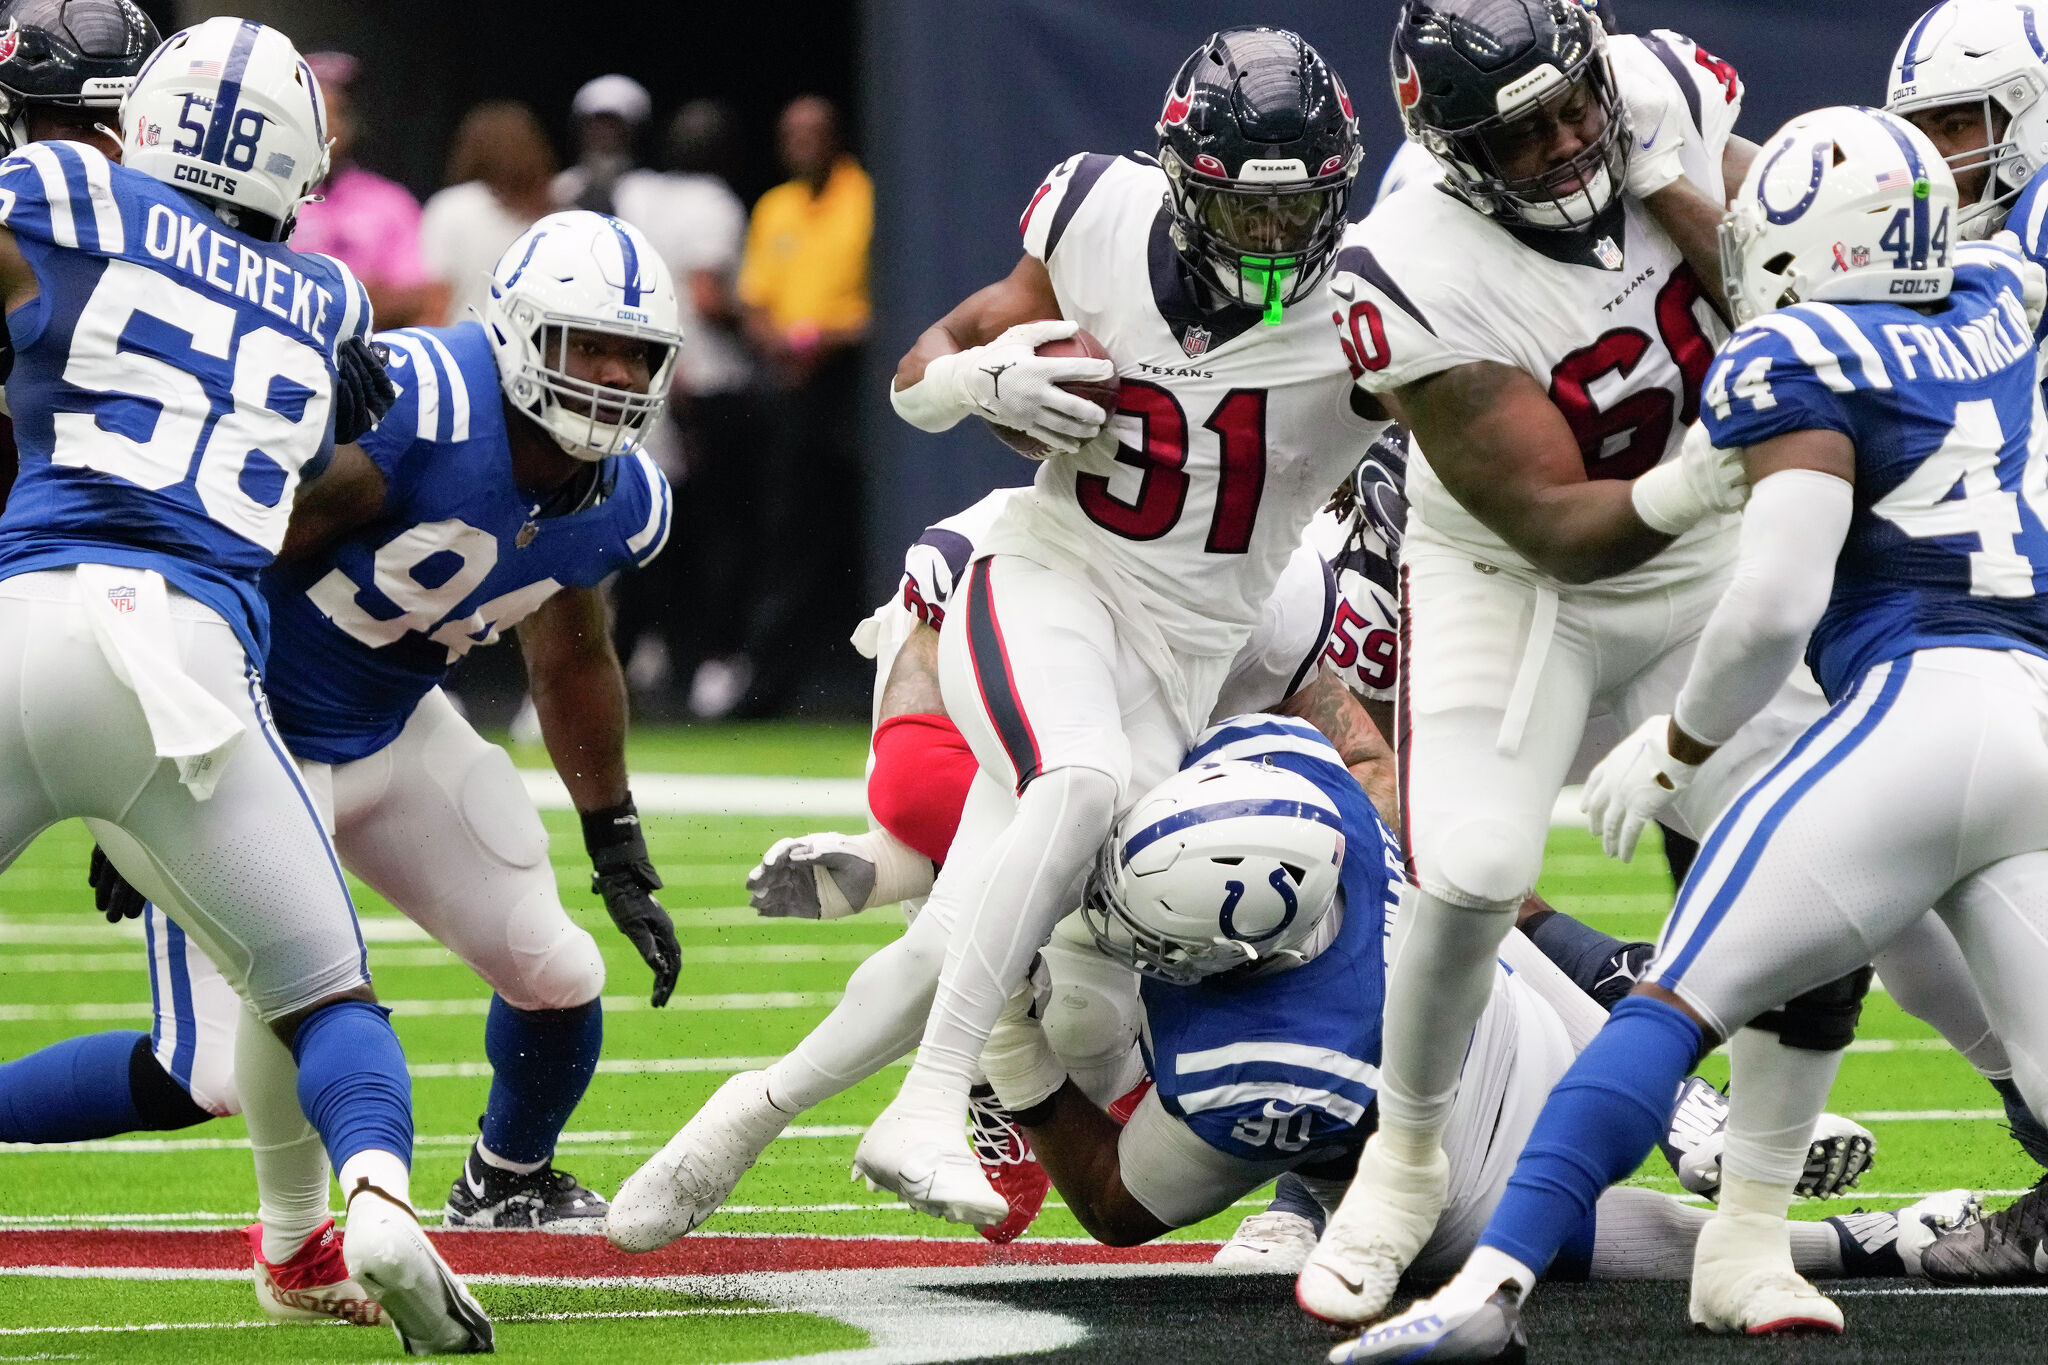 Houston Texans: Analyzing impact of 5 key players in tie with Colts